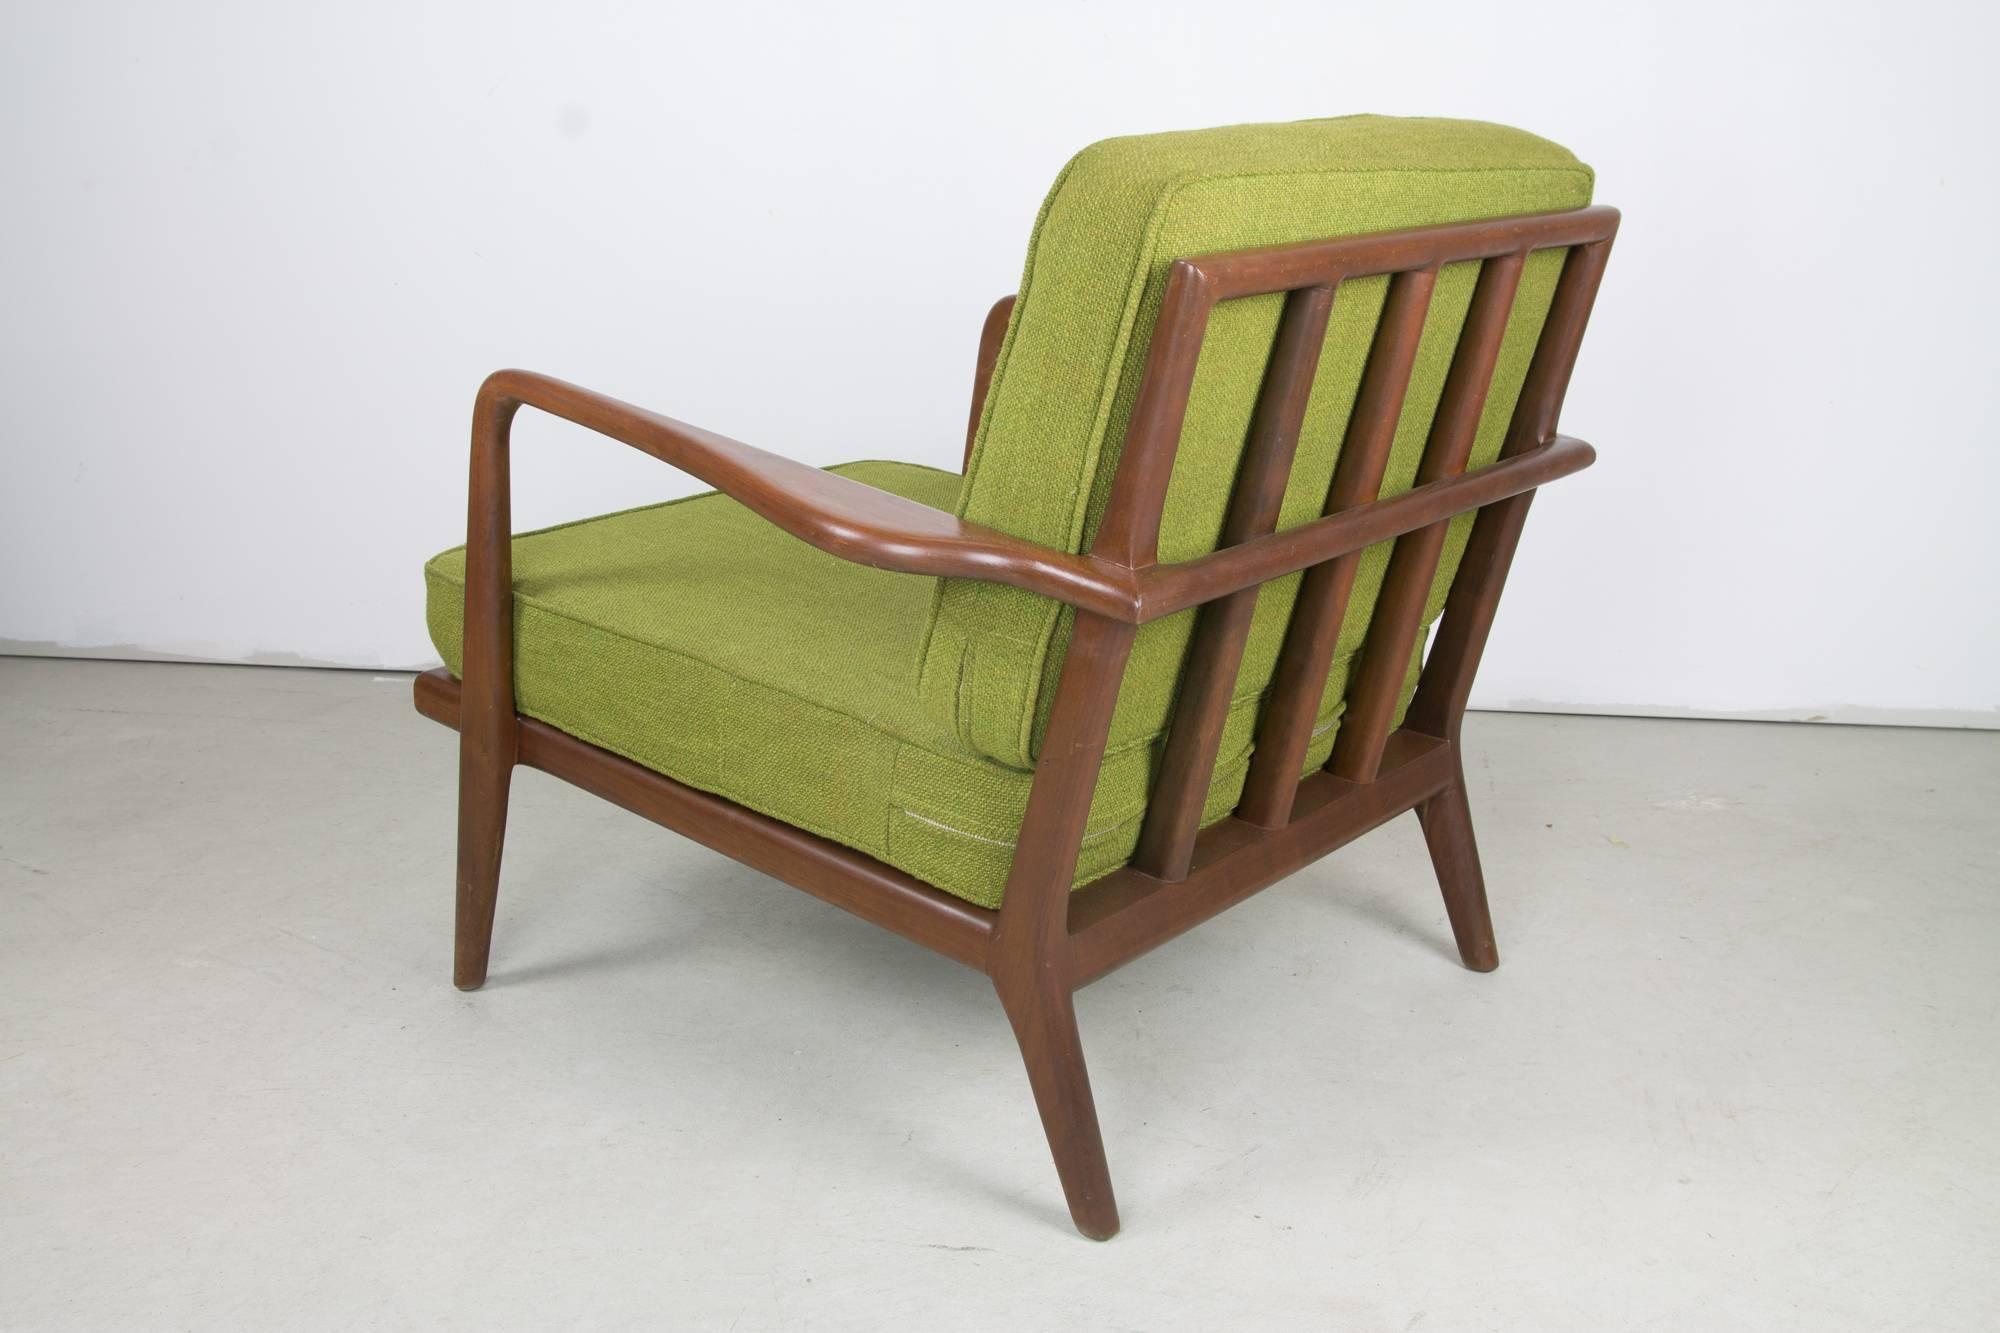 An original production WAC rail back lounge chair by Mel Smilow in natural finish solid walnut with original fabric upholstery.